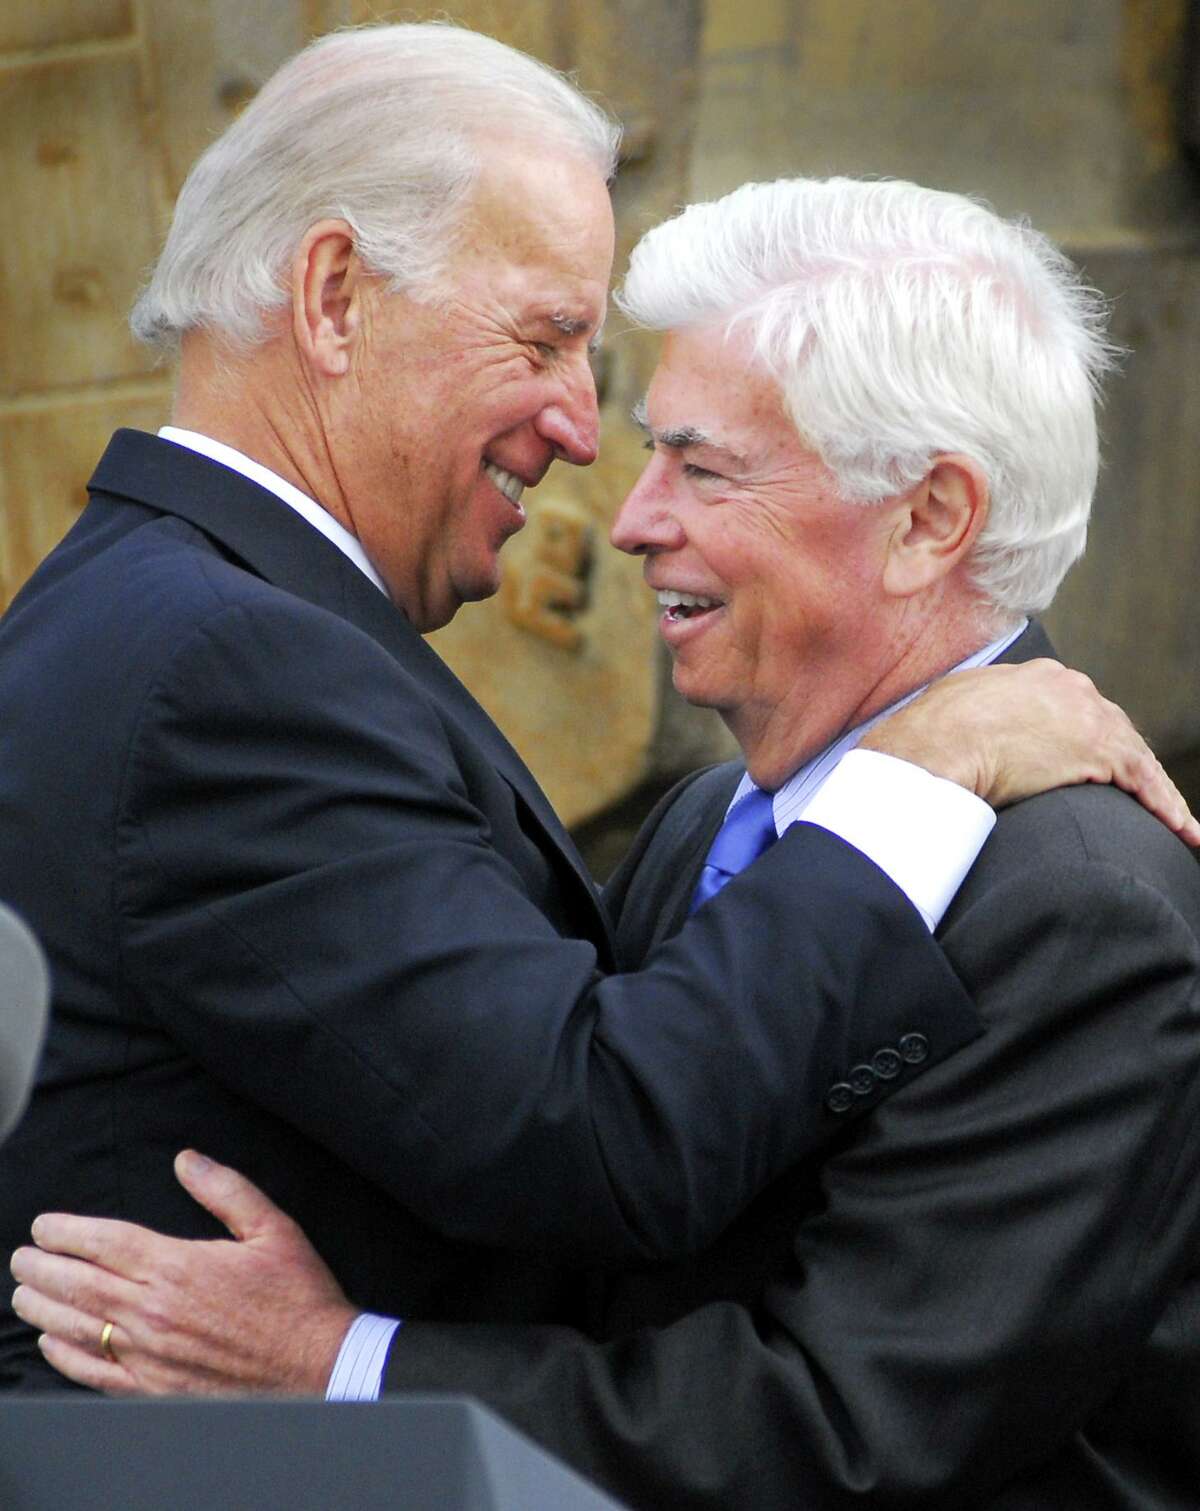 Photography by PETER HVIZDAK ph1153 #6182 Fairfield, Connecticut- October 5, 2009: U.S. Vice-President Joe Biden hugs U.S. Senator Chris Dodd after speaking at a Fairfield Park & Ride commuter parking lot on Jefferson Street in Fairfield near exit 46 by the Merritt Parkway. Biden tauted the Federal stimulus Recovery Act that pumped money into Merritt Parkway safety enchancements and road improvements. Biden was joined by U.S. Senator Chris Dodd and U.S. Representative Jim Himes. Himes is serving in his first term in Congress, while Dodd has been struggling with low poll numbers and faces a potential Democratic primary.